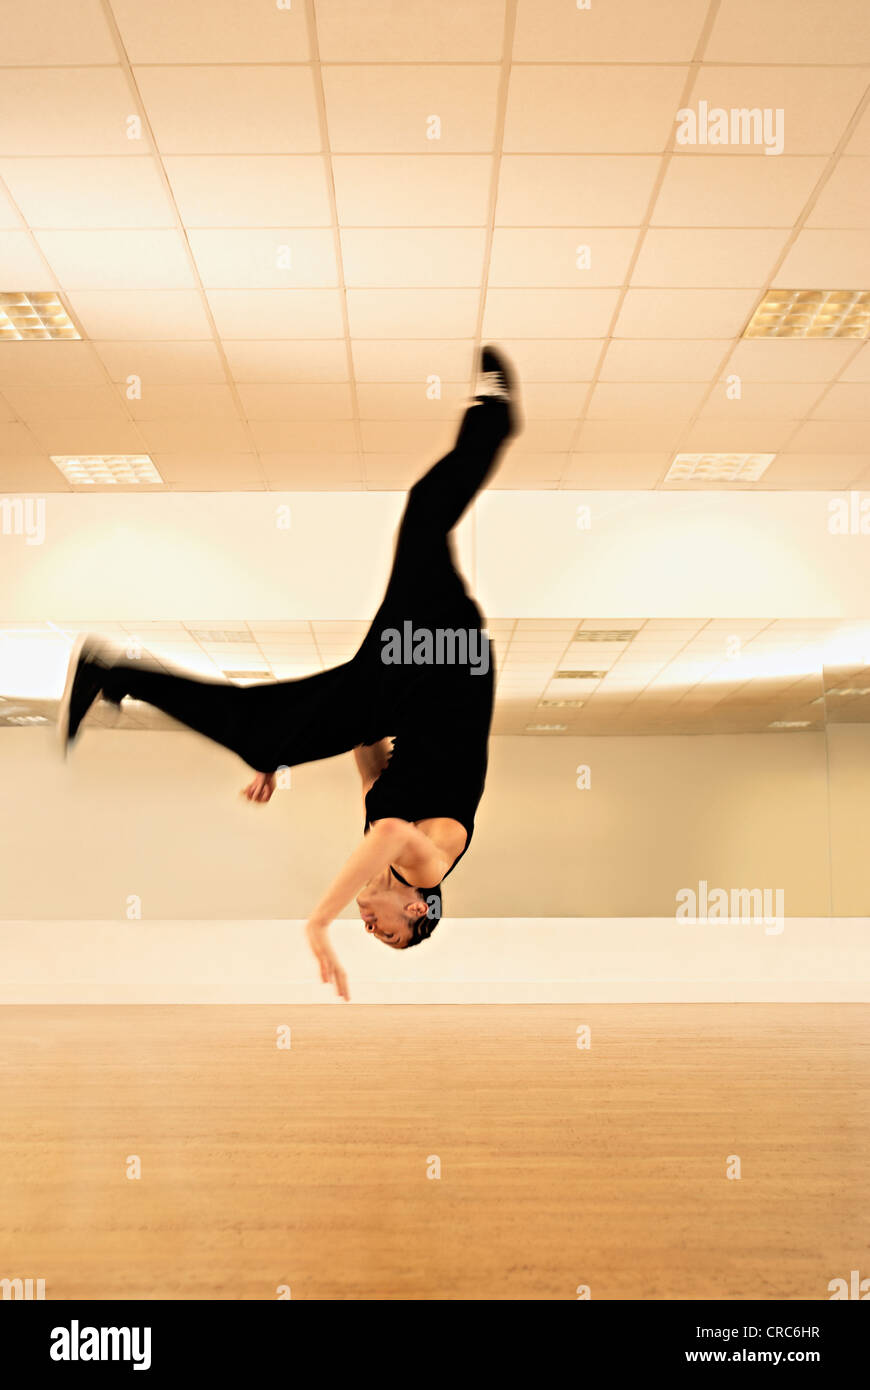 Dancer posing in mid-air Banque D'Images